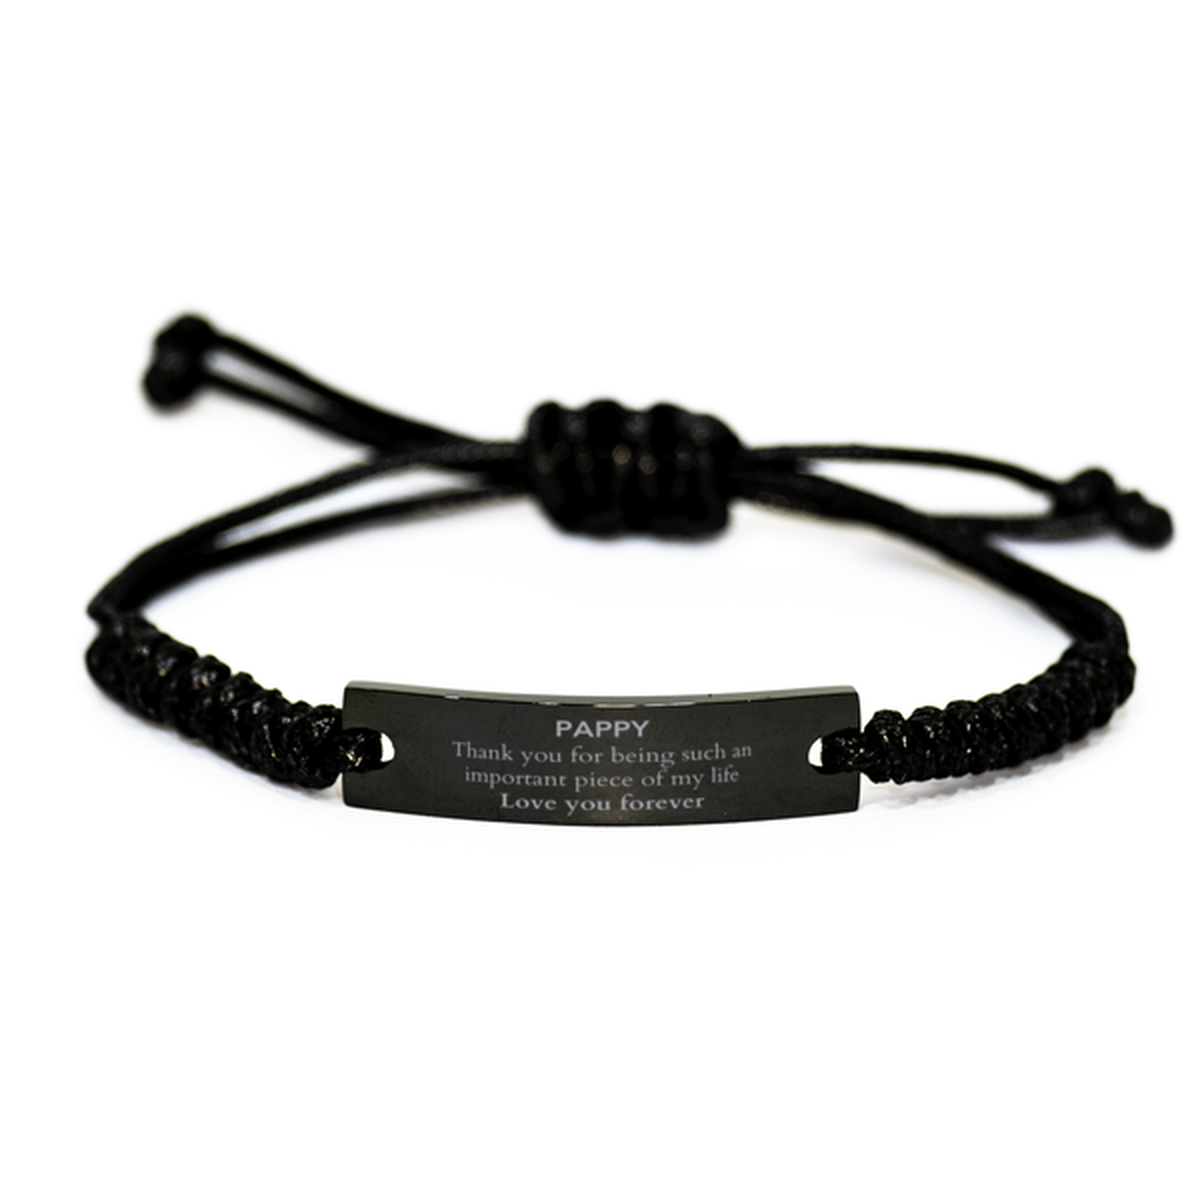 Appropriate Pappy Black Rope Bracelet Epic Birthday Gifts for Pappy Thank you for being such an important piece of my life Pappy Christmas Mothers Fathers Day